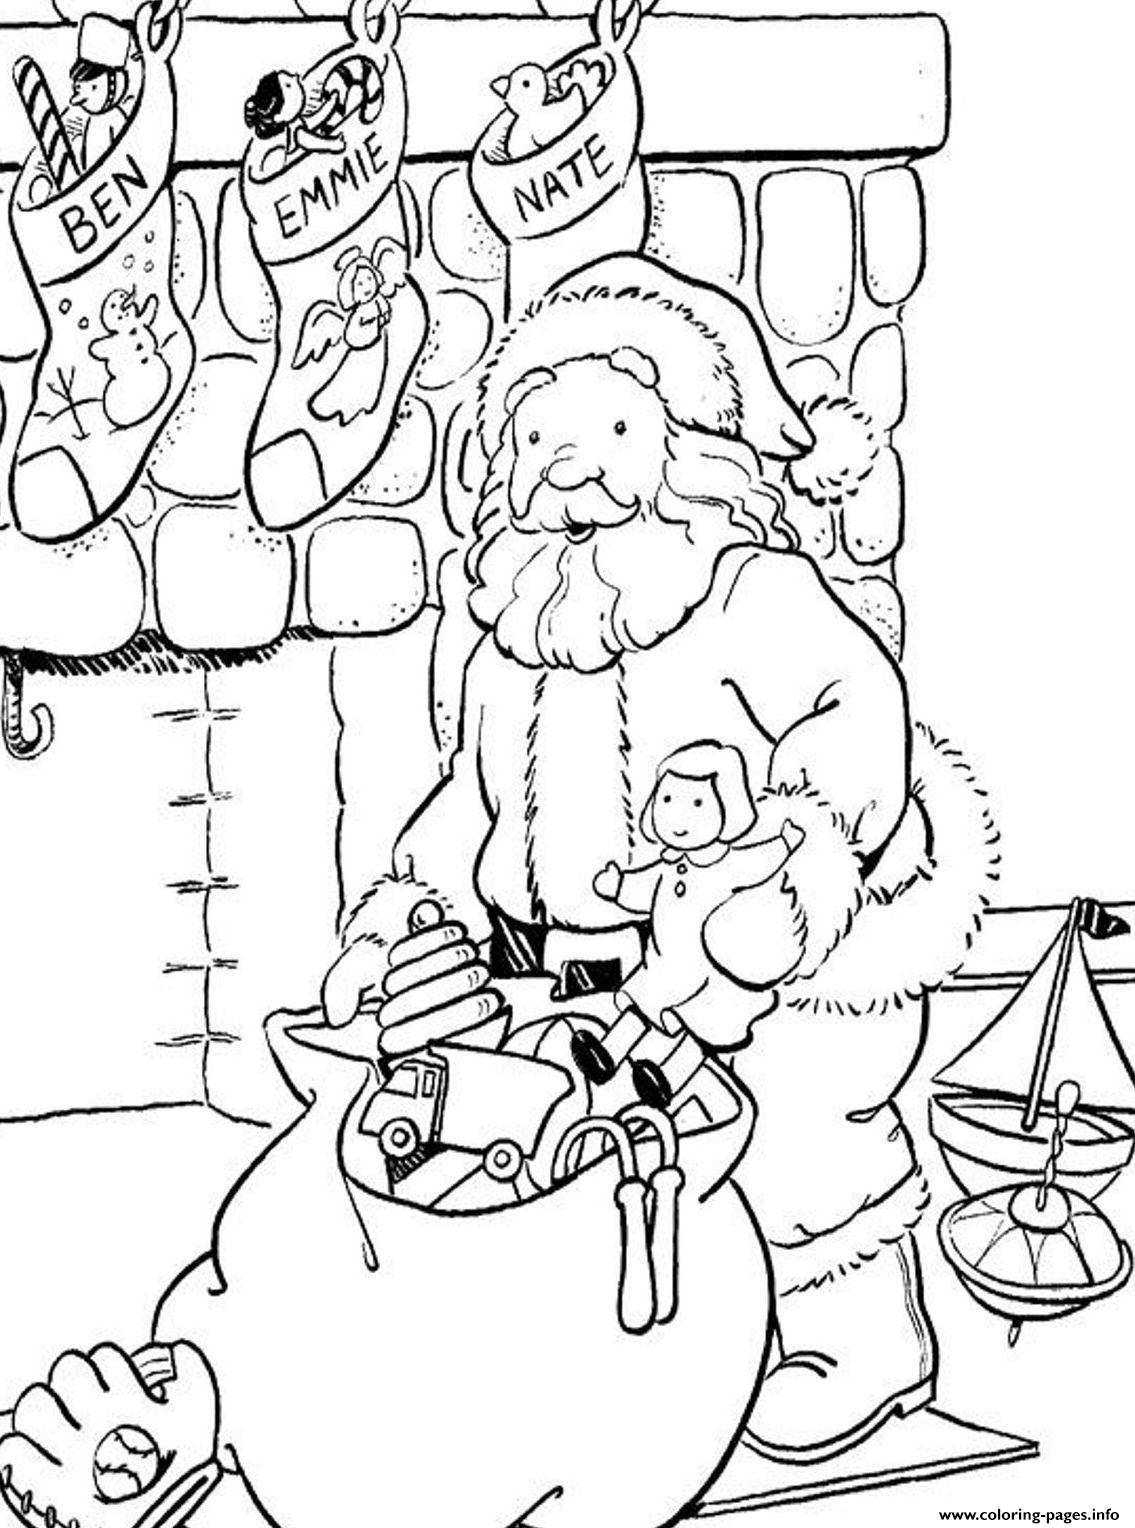 Fireplace And Stocking Santa S For Kids Printable3635 Coloring Pages